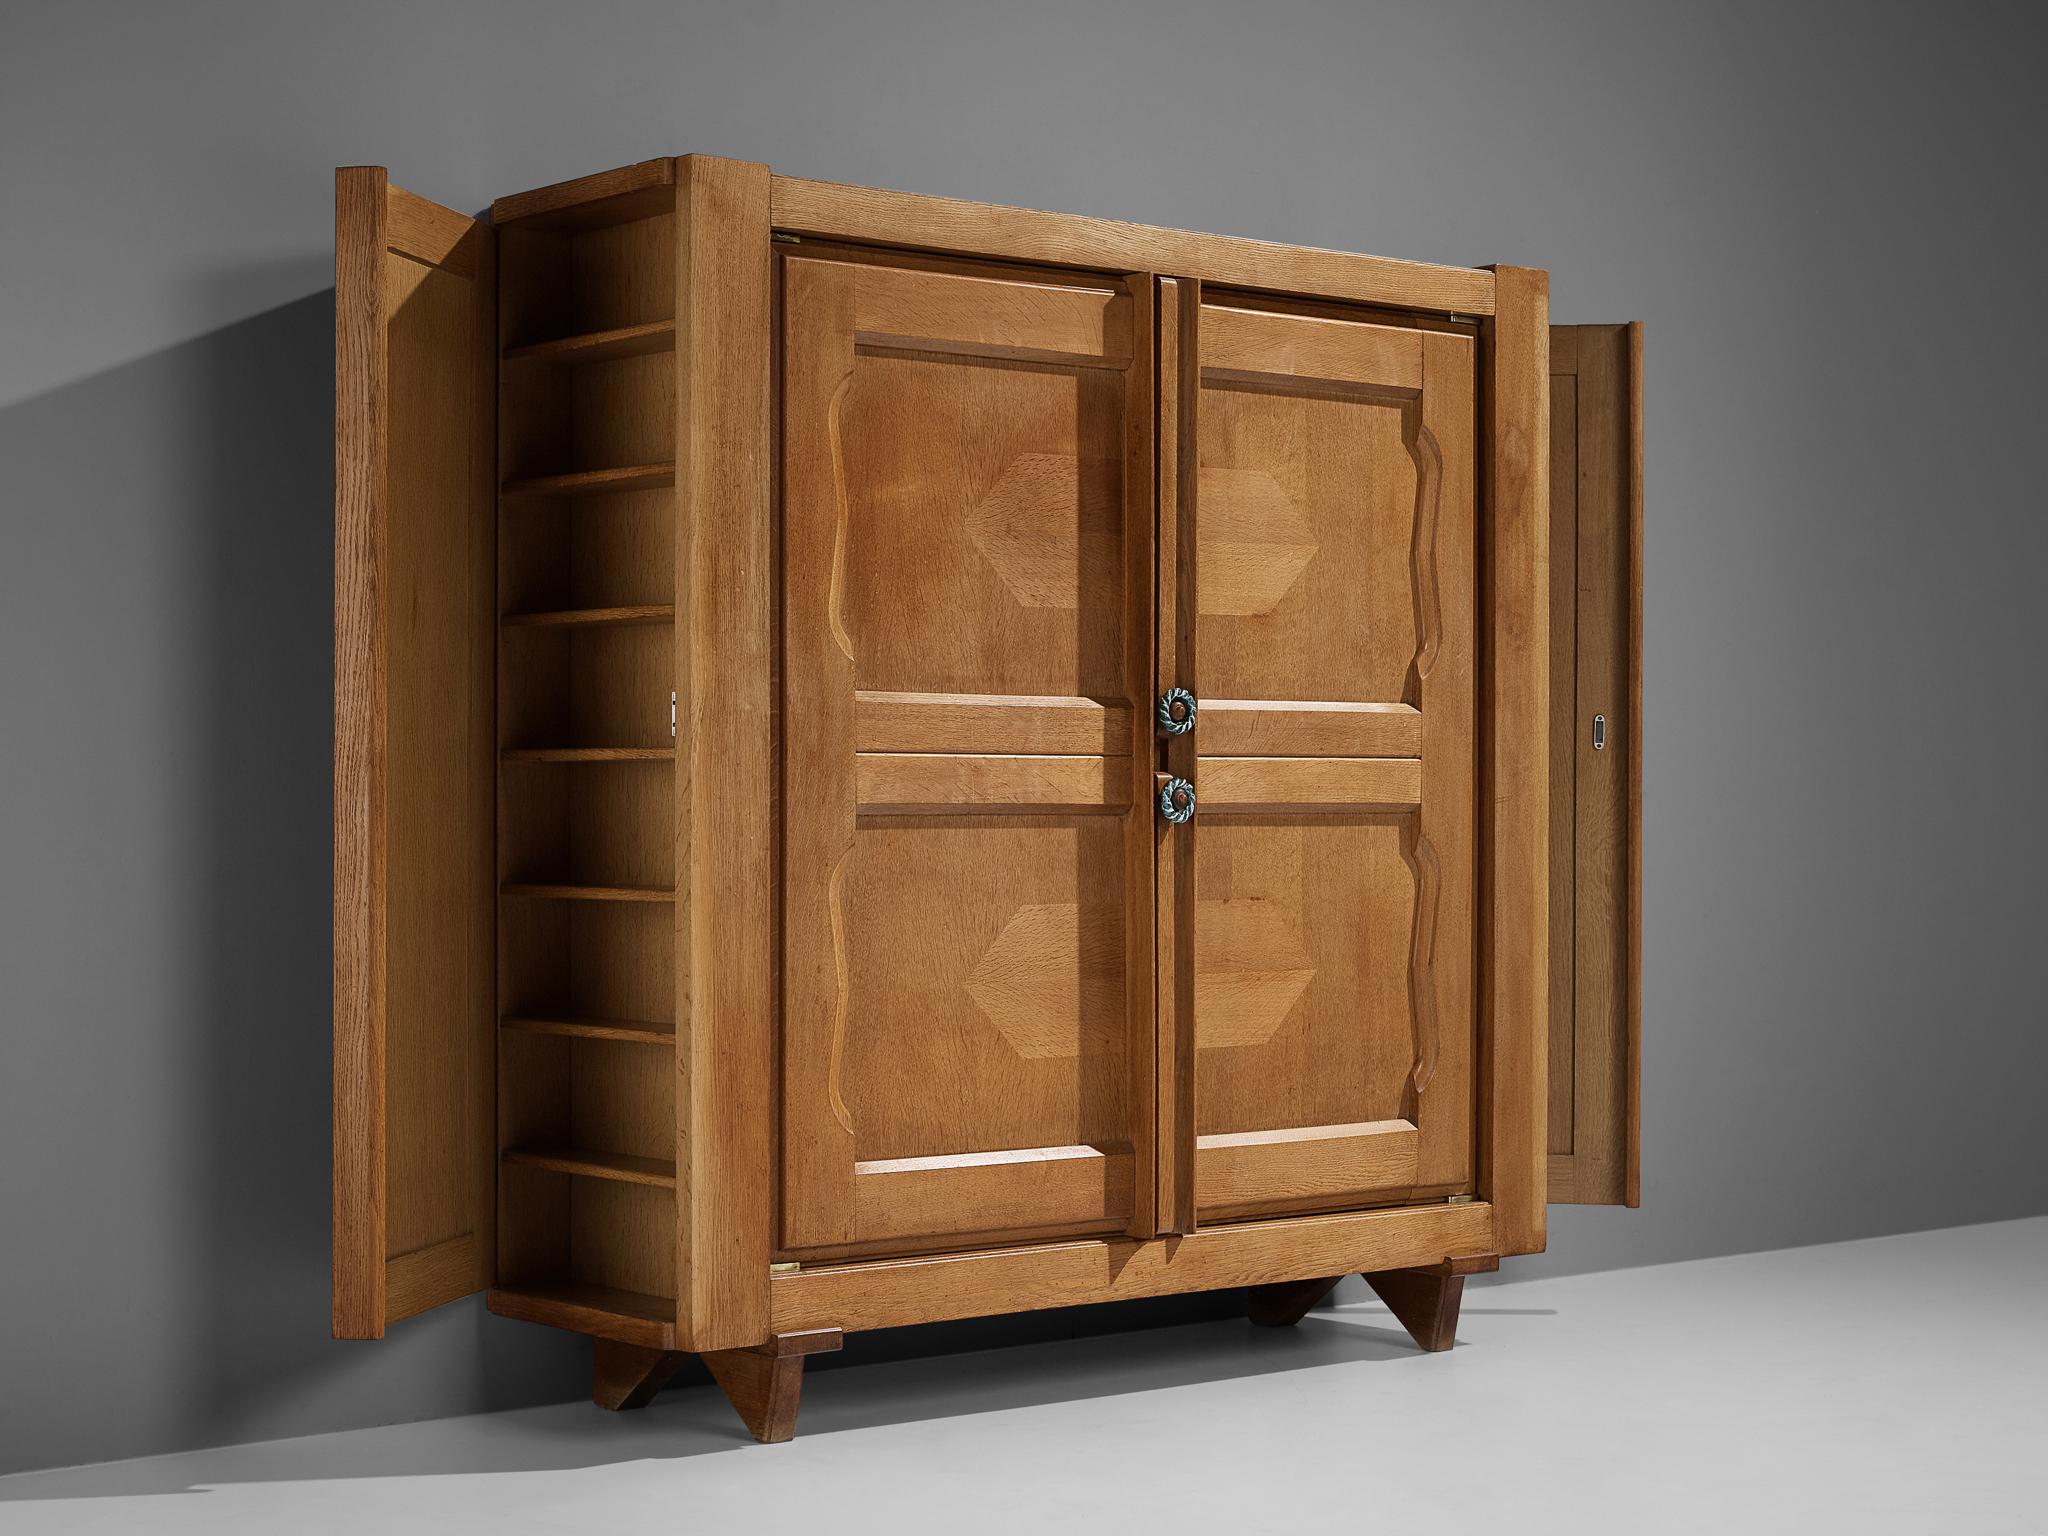 Guillerme et Chambron for Votre Maison, 'Raphael' cabinet, oak, brass, ceramics, France, 1960s

This cabinet is designed by Guillerme et Chambron and features geometric inlays in the doors. The cabinet offers plenty of storage with four shelves. On